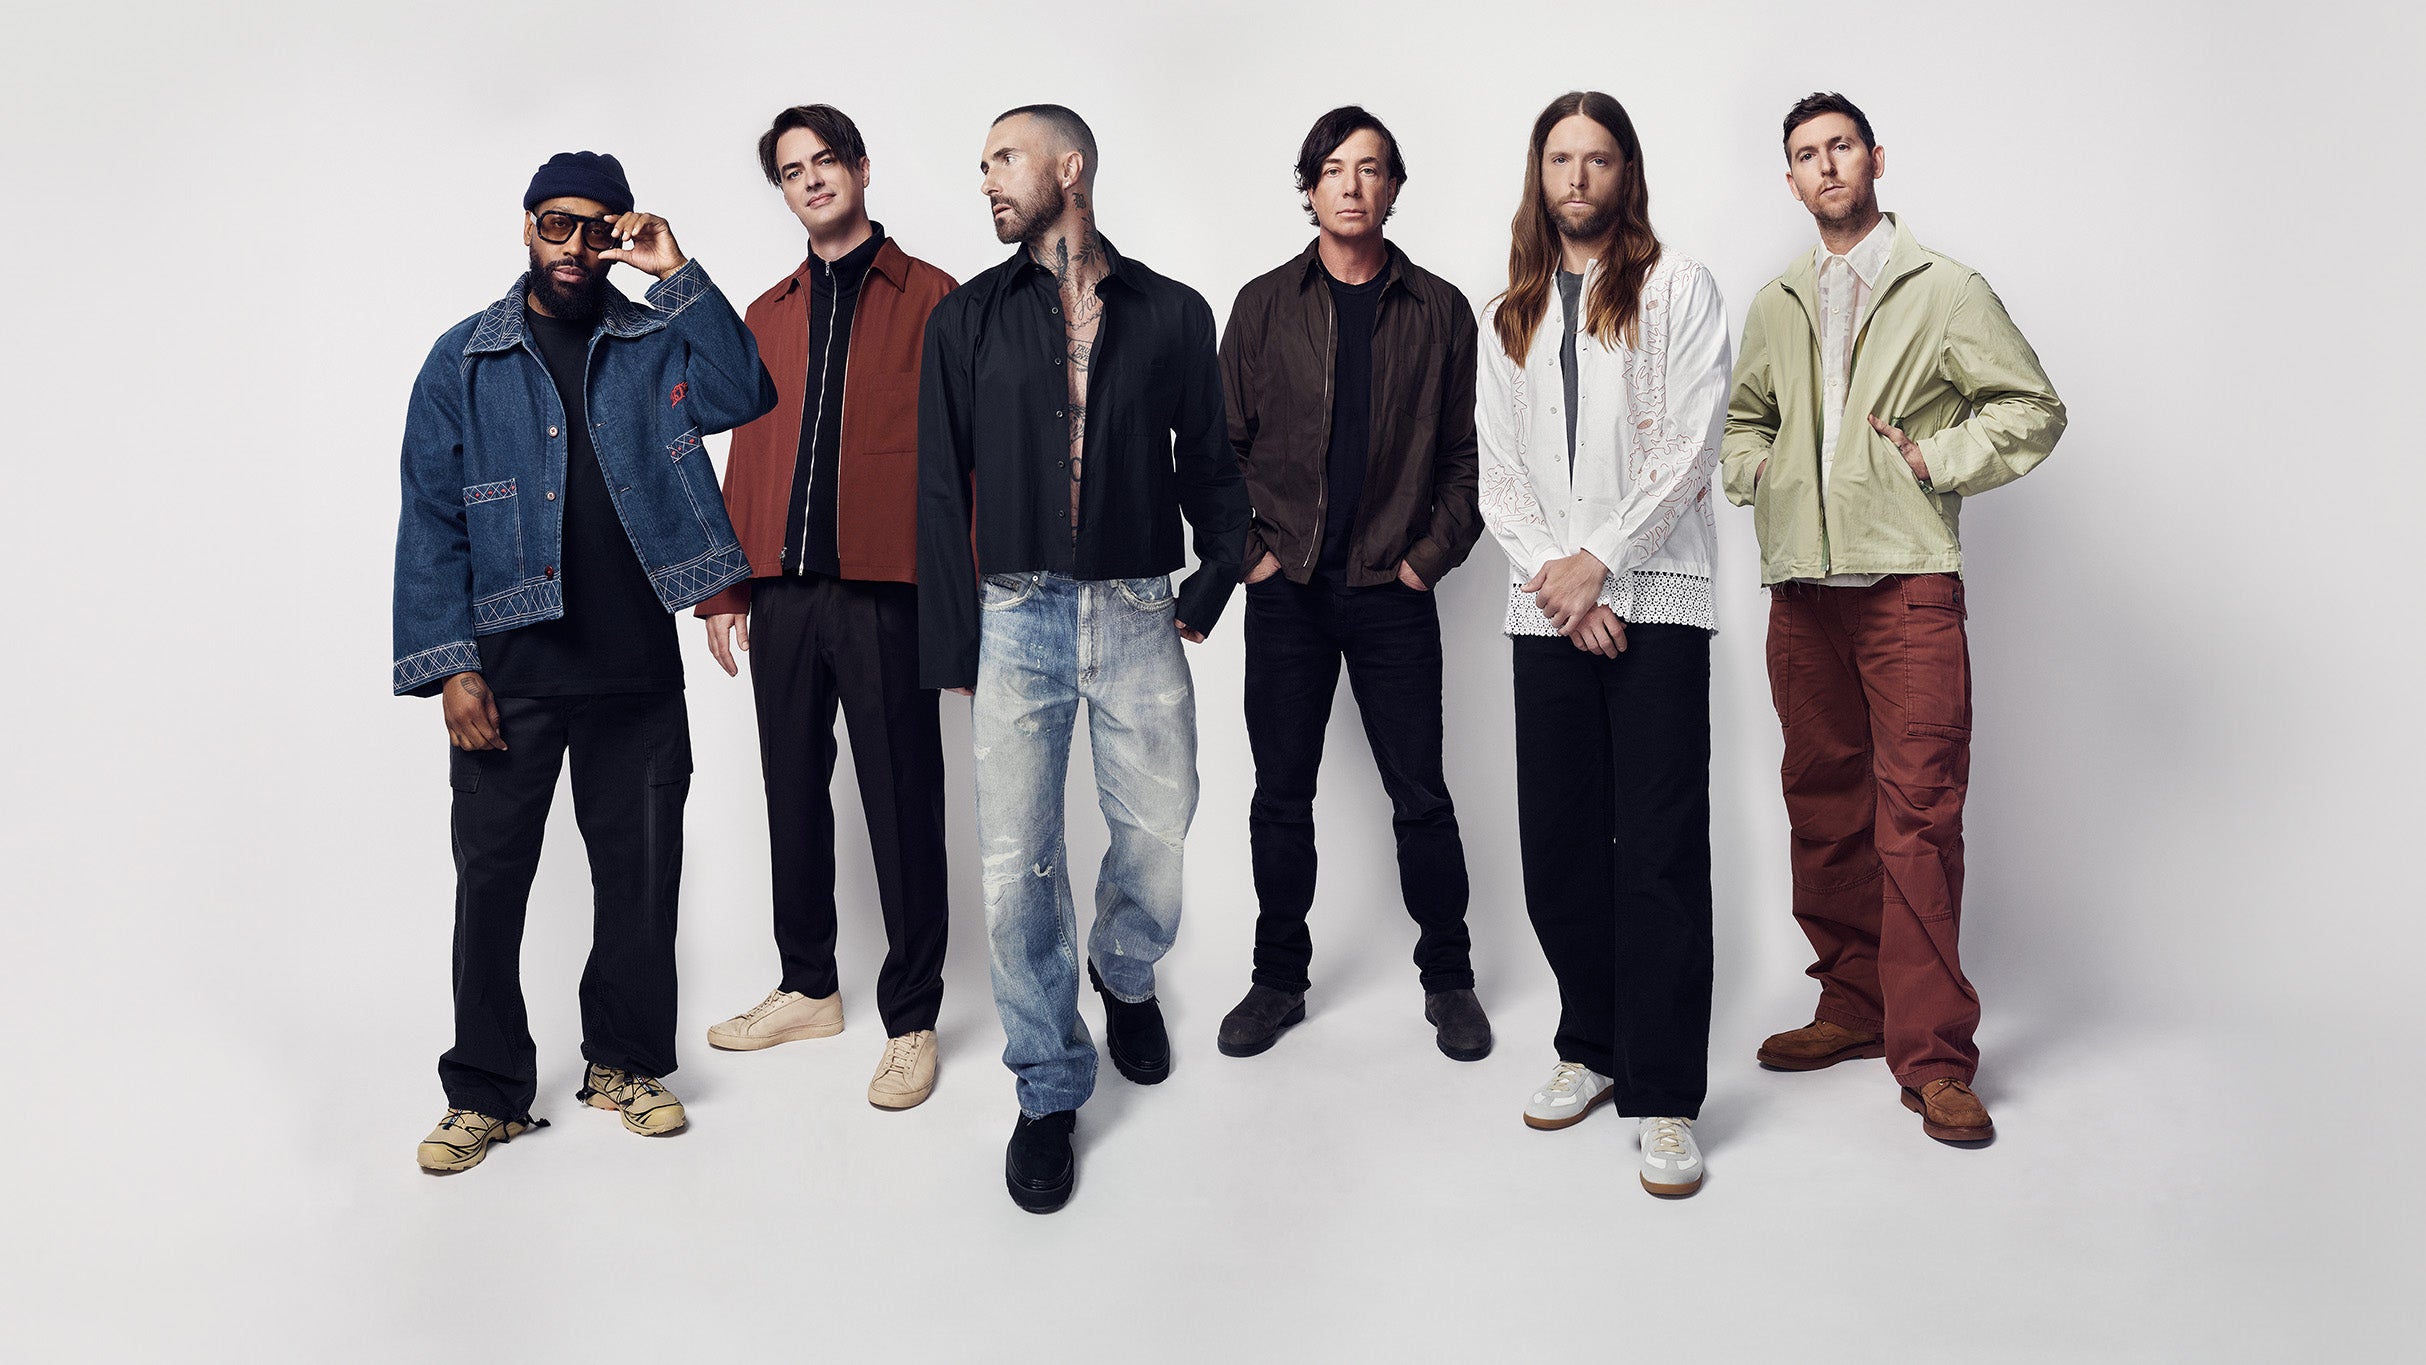 new presale password for Maroon 5 Live In Concert affordable tickets in Wantagh